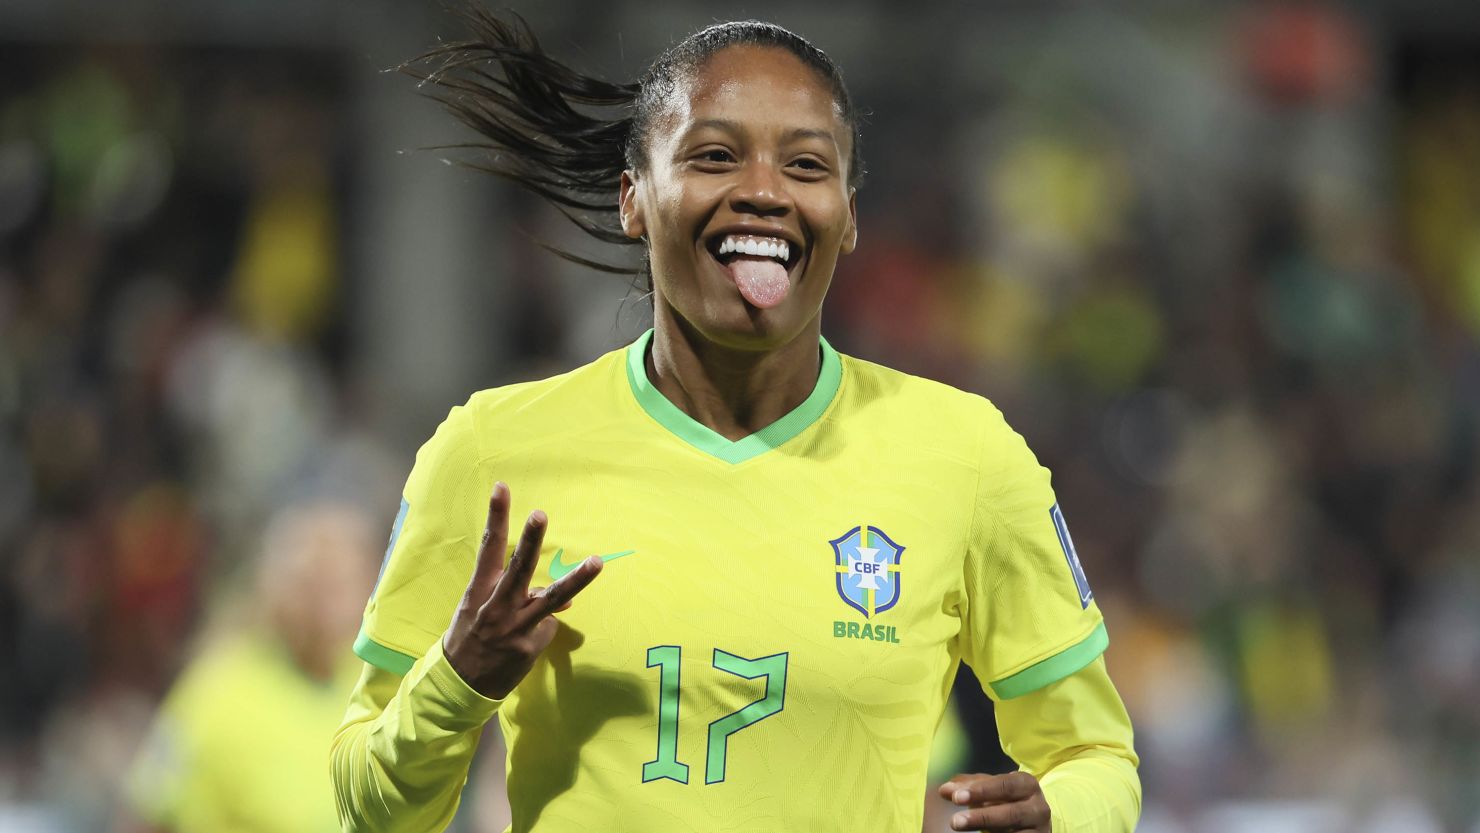 Brazil's Ary Borges celebrates her hattrick goal against Panama.